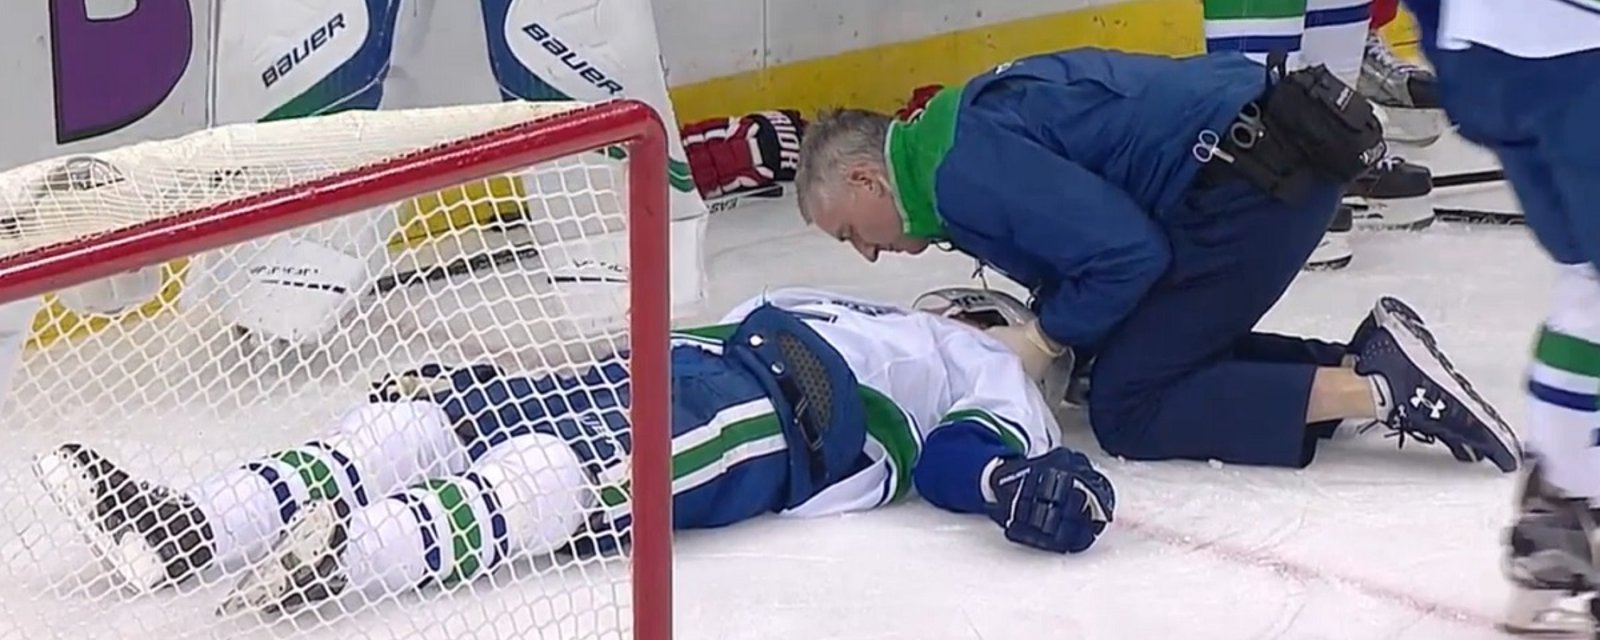 Bad blood continues between Canucks &amp;amp; Devils after knock out hit last season.